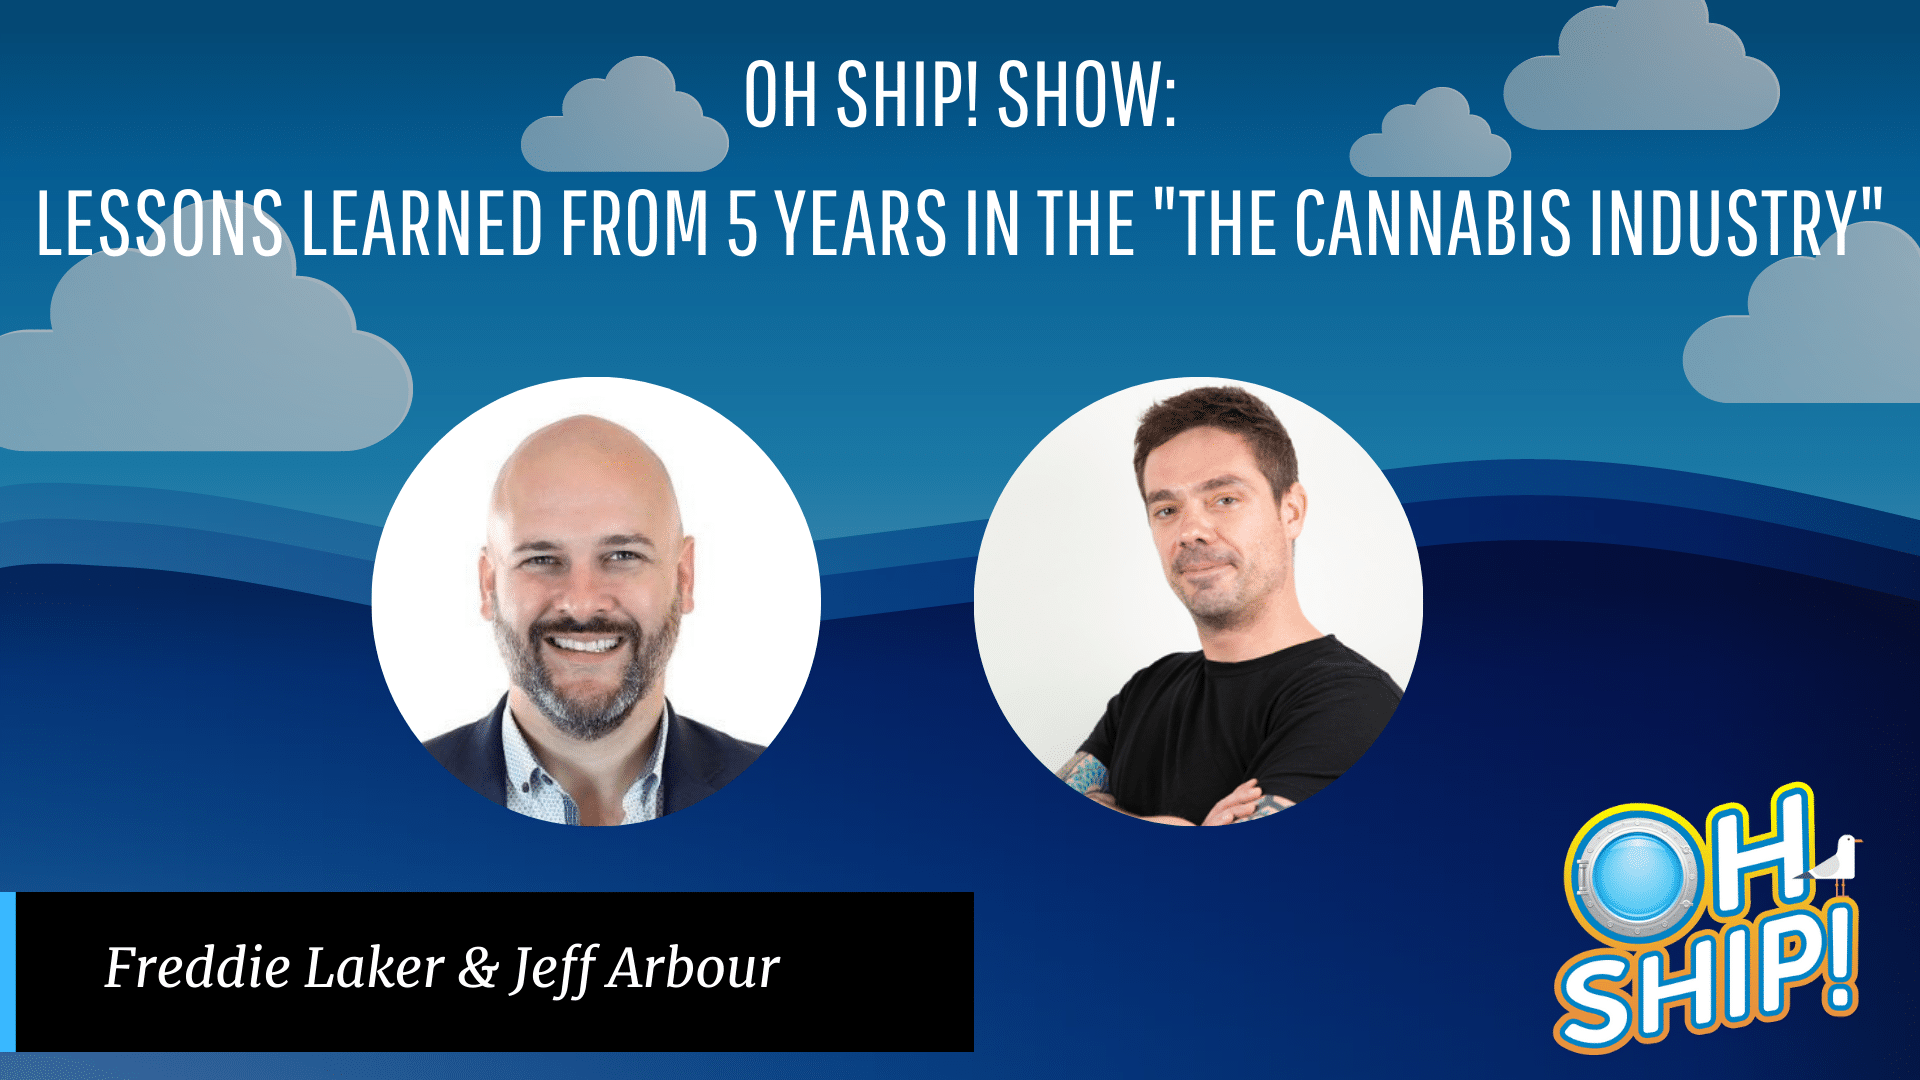 Promotional image for the "OH SHIP! SHOW," featuring Freddie Laker and Jeff Arbour discussing "Lessons Learned from 5 Years in the Cannabis Industry." The background displays clouds and a gradient blue sky, with the show's logo in the bottom right corner. Don't miss this insightful Oh Ship! Show episode!